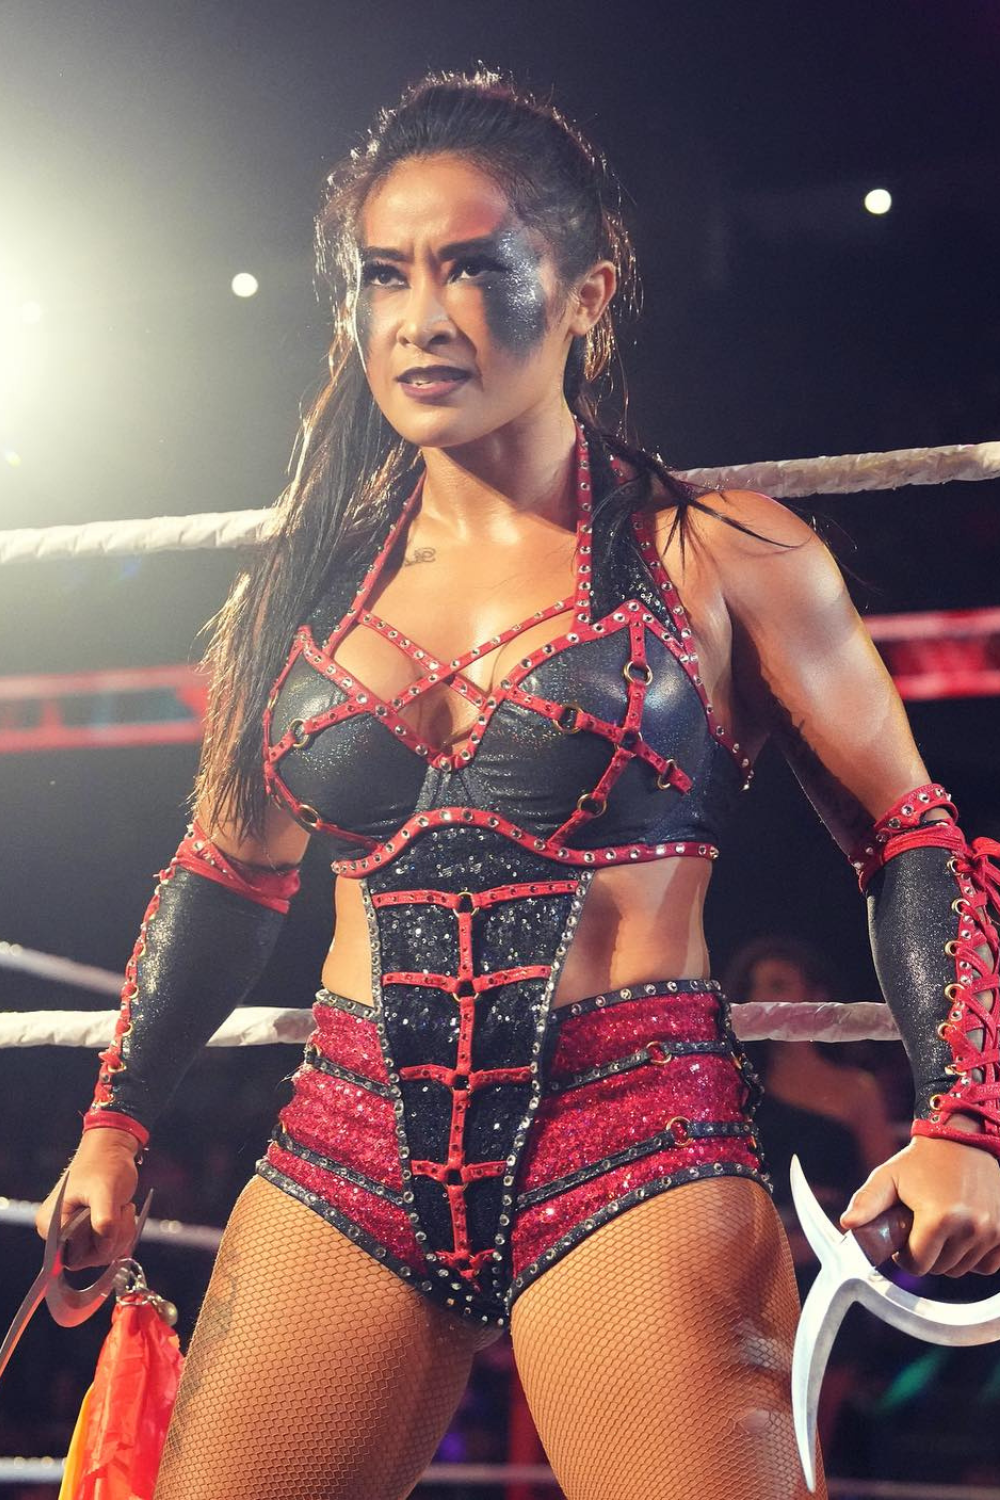 Xia Li, The First Chinese Woman Wrestler At WWE